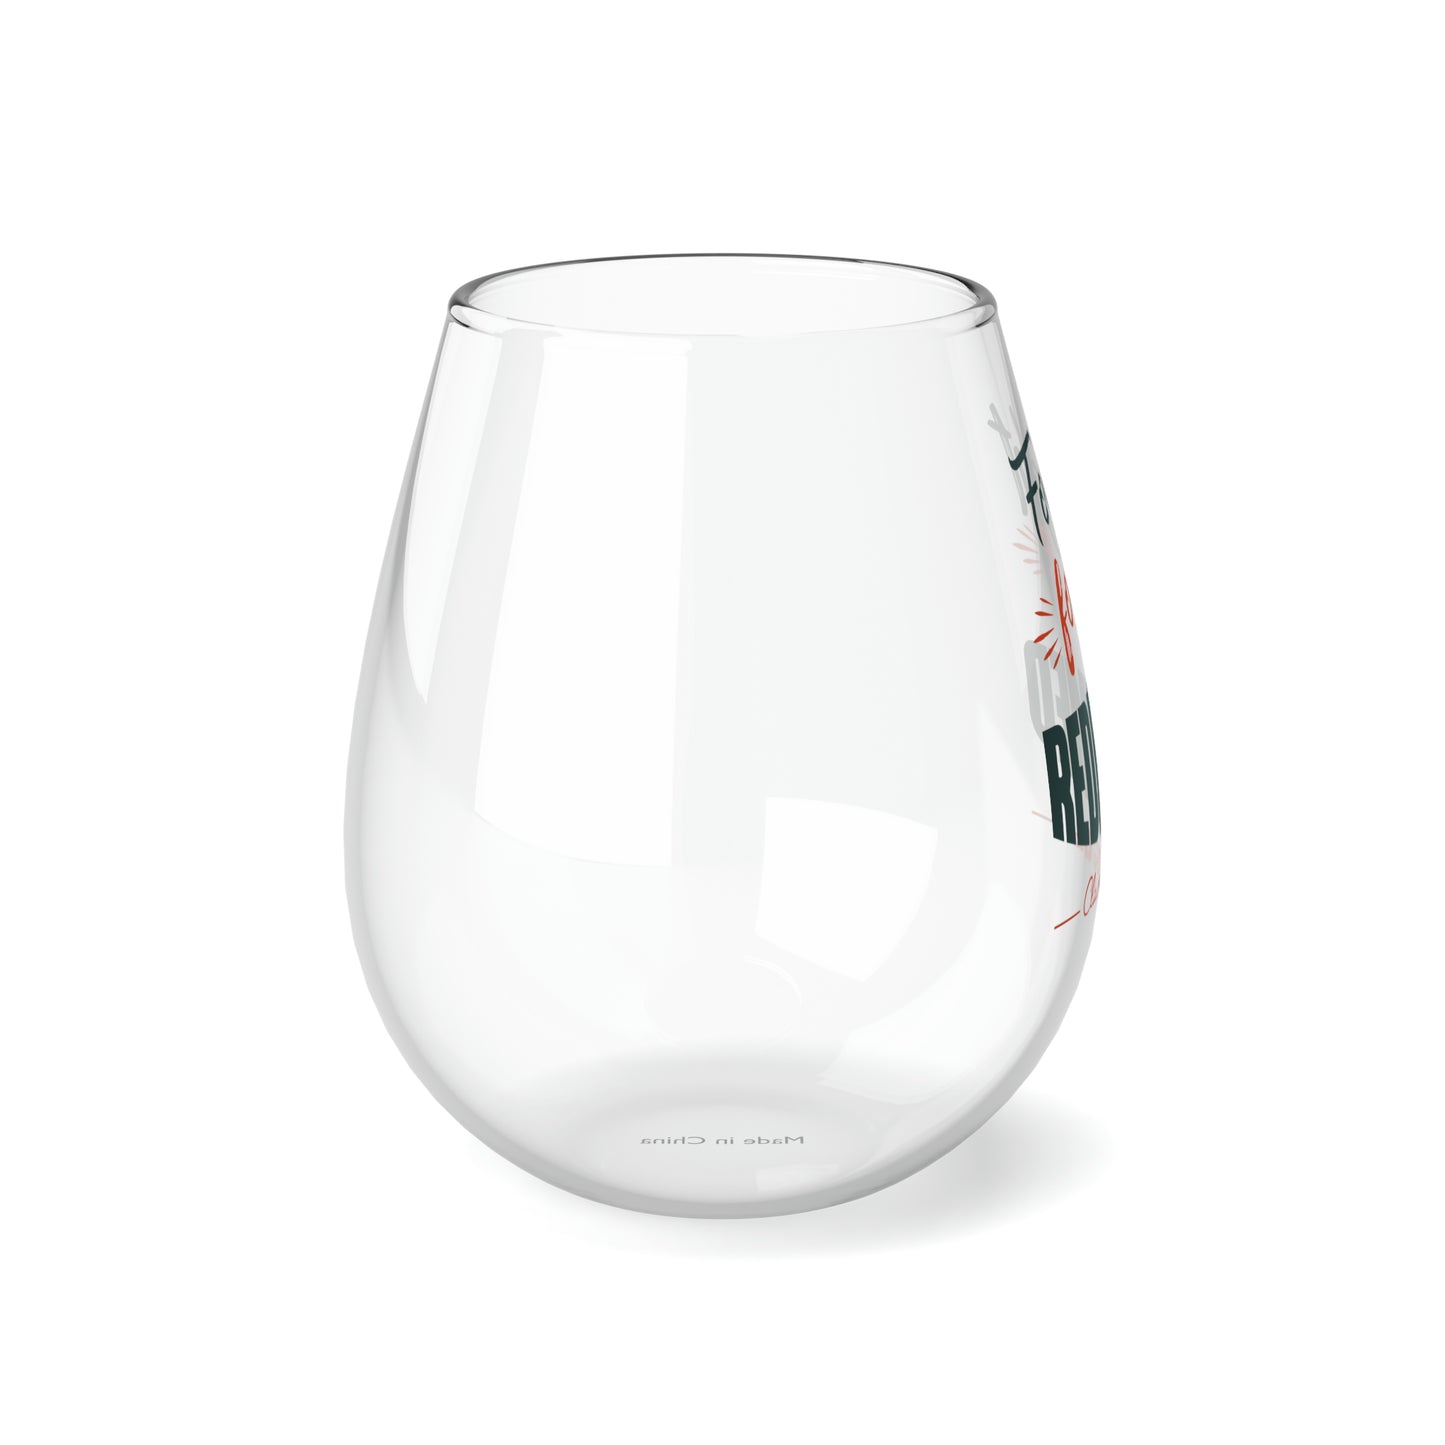 Fought For & Redeemed Stemless Wine Glass, 11.75oz